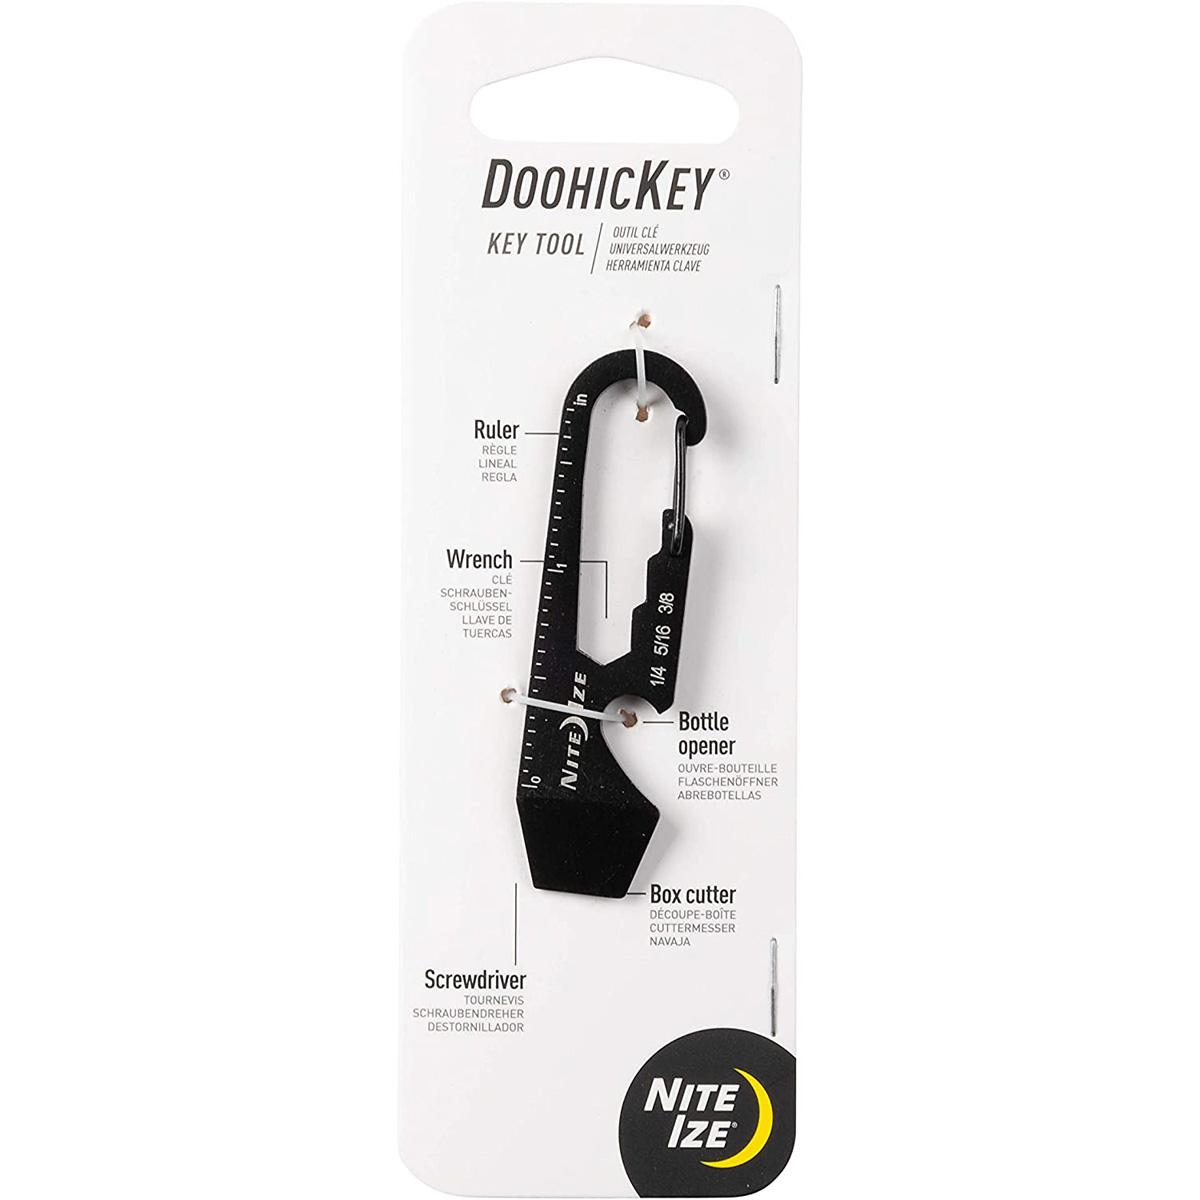 Nite Ize DoohicKey Stainless Steel Keychain Multi Tool for $2.99